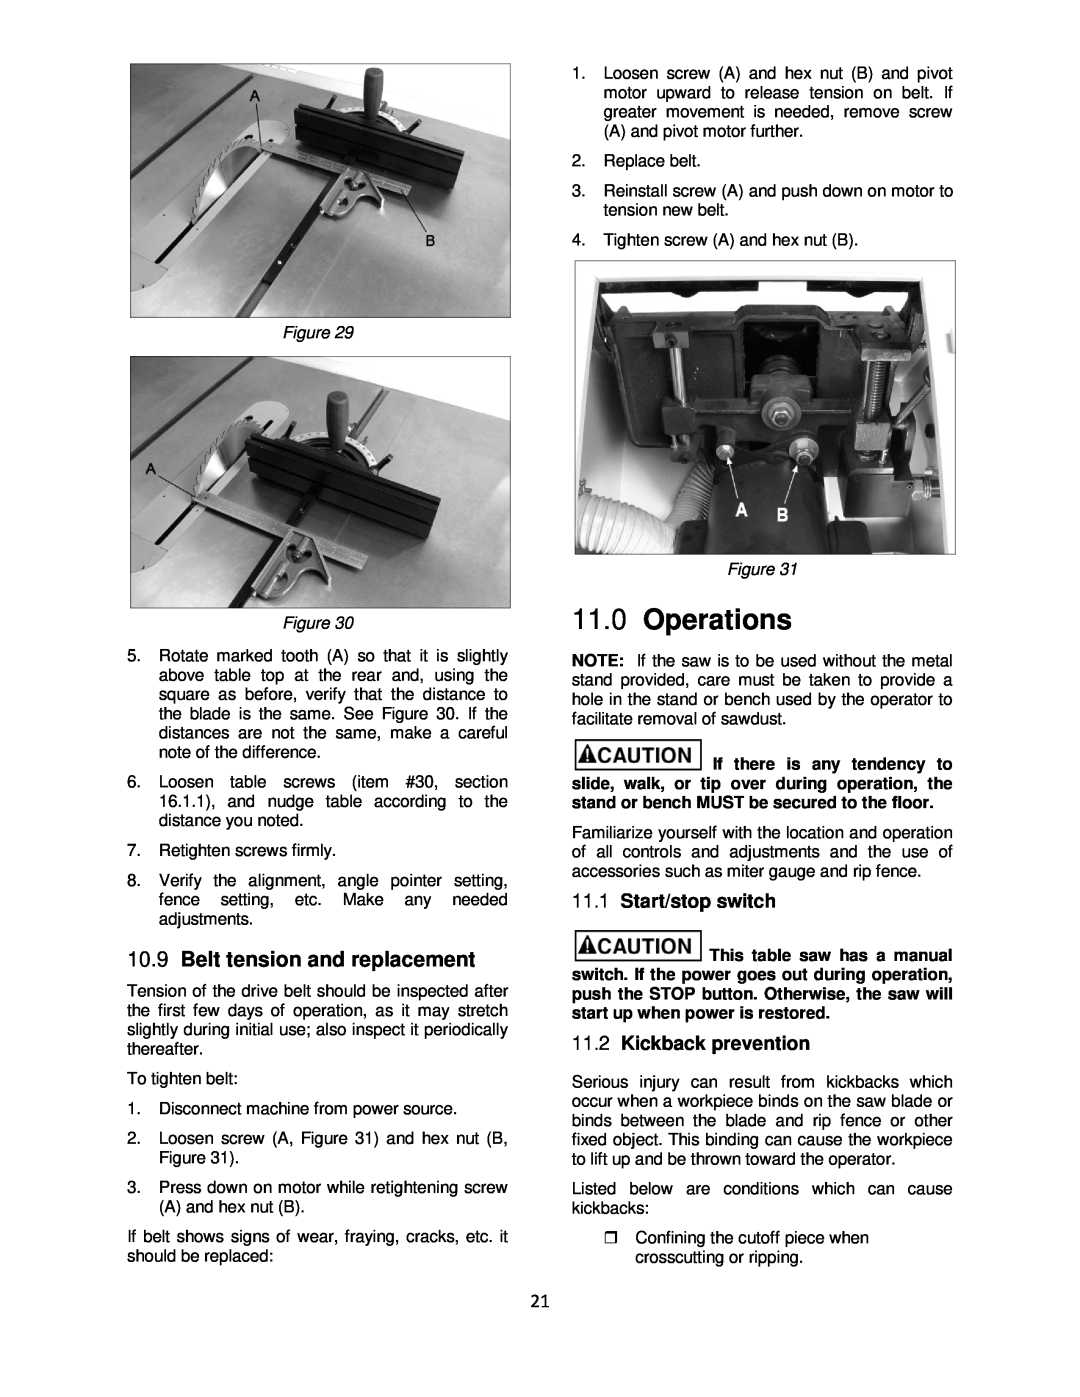 Powermatic 64B operating instructions Operations, Belt tension and replacement, Start/stop switch, Kickback prevention 